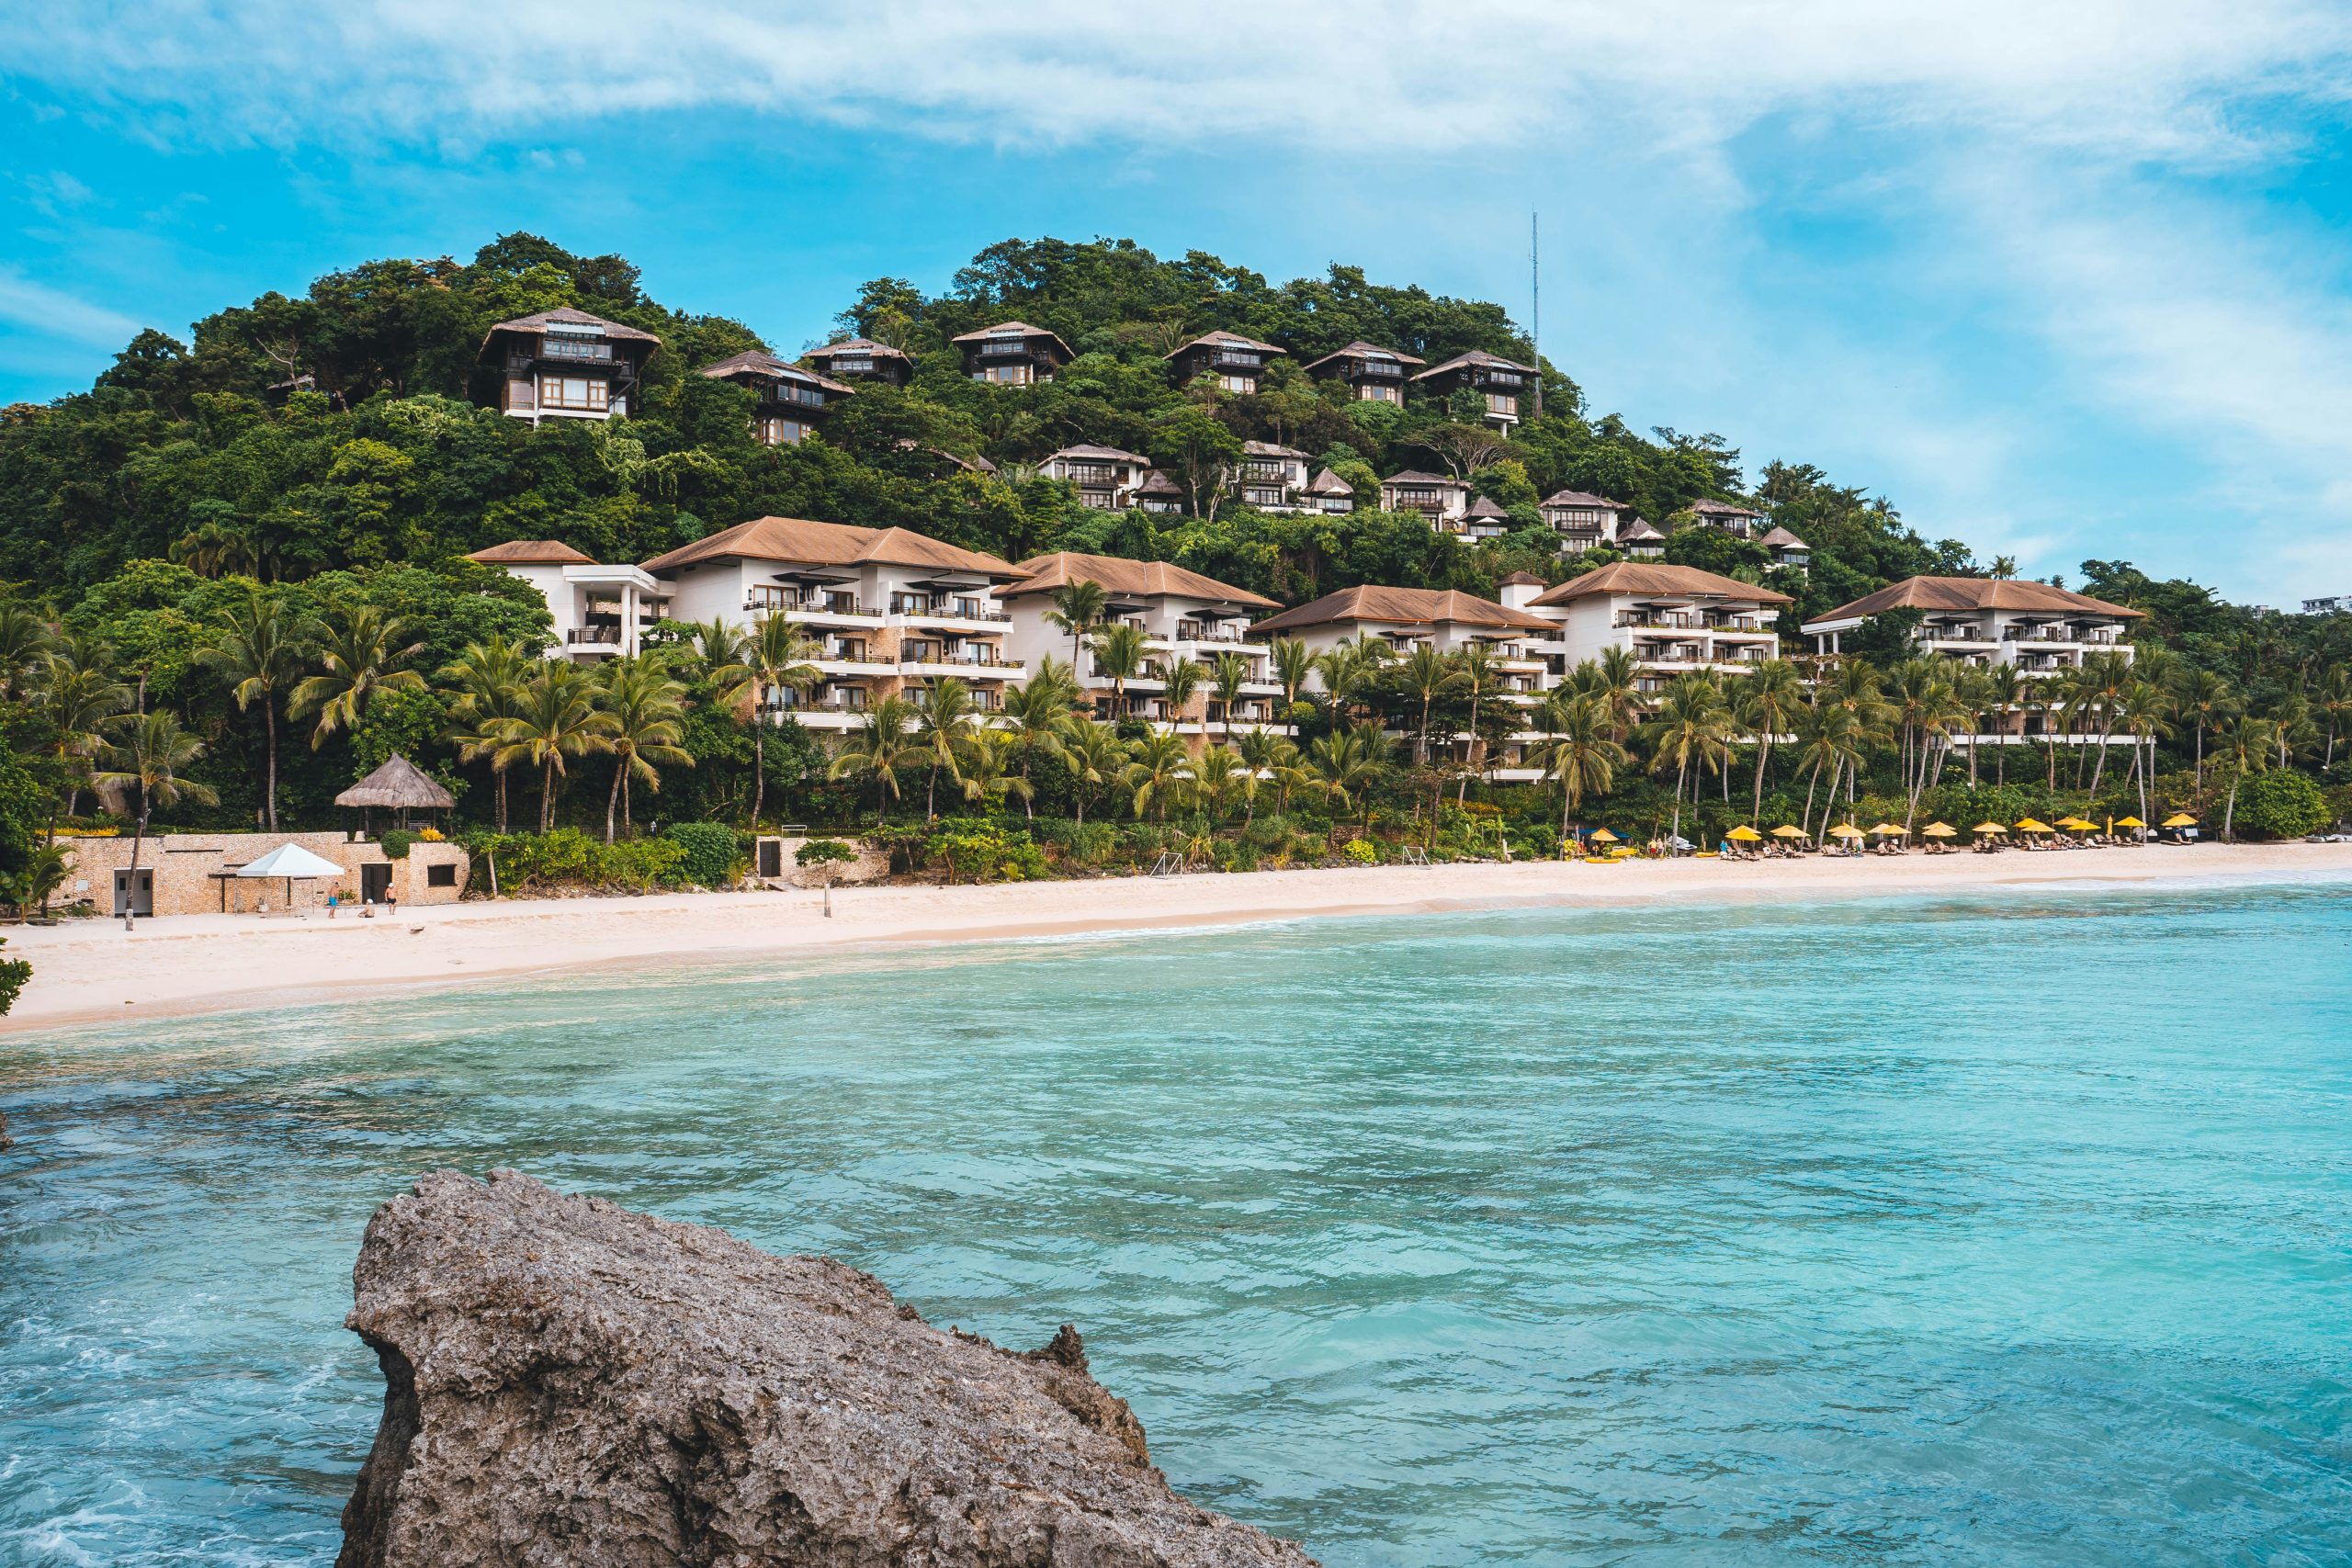 discover top beach resorts around the world with luxurious amenities and breathtaking ocean views. plan your next relaxing getaway at a beach resort of your choice.